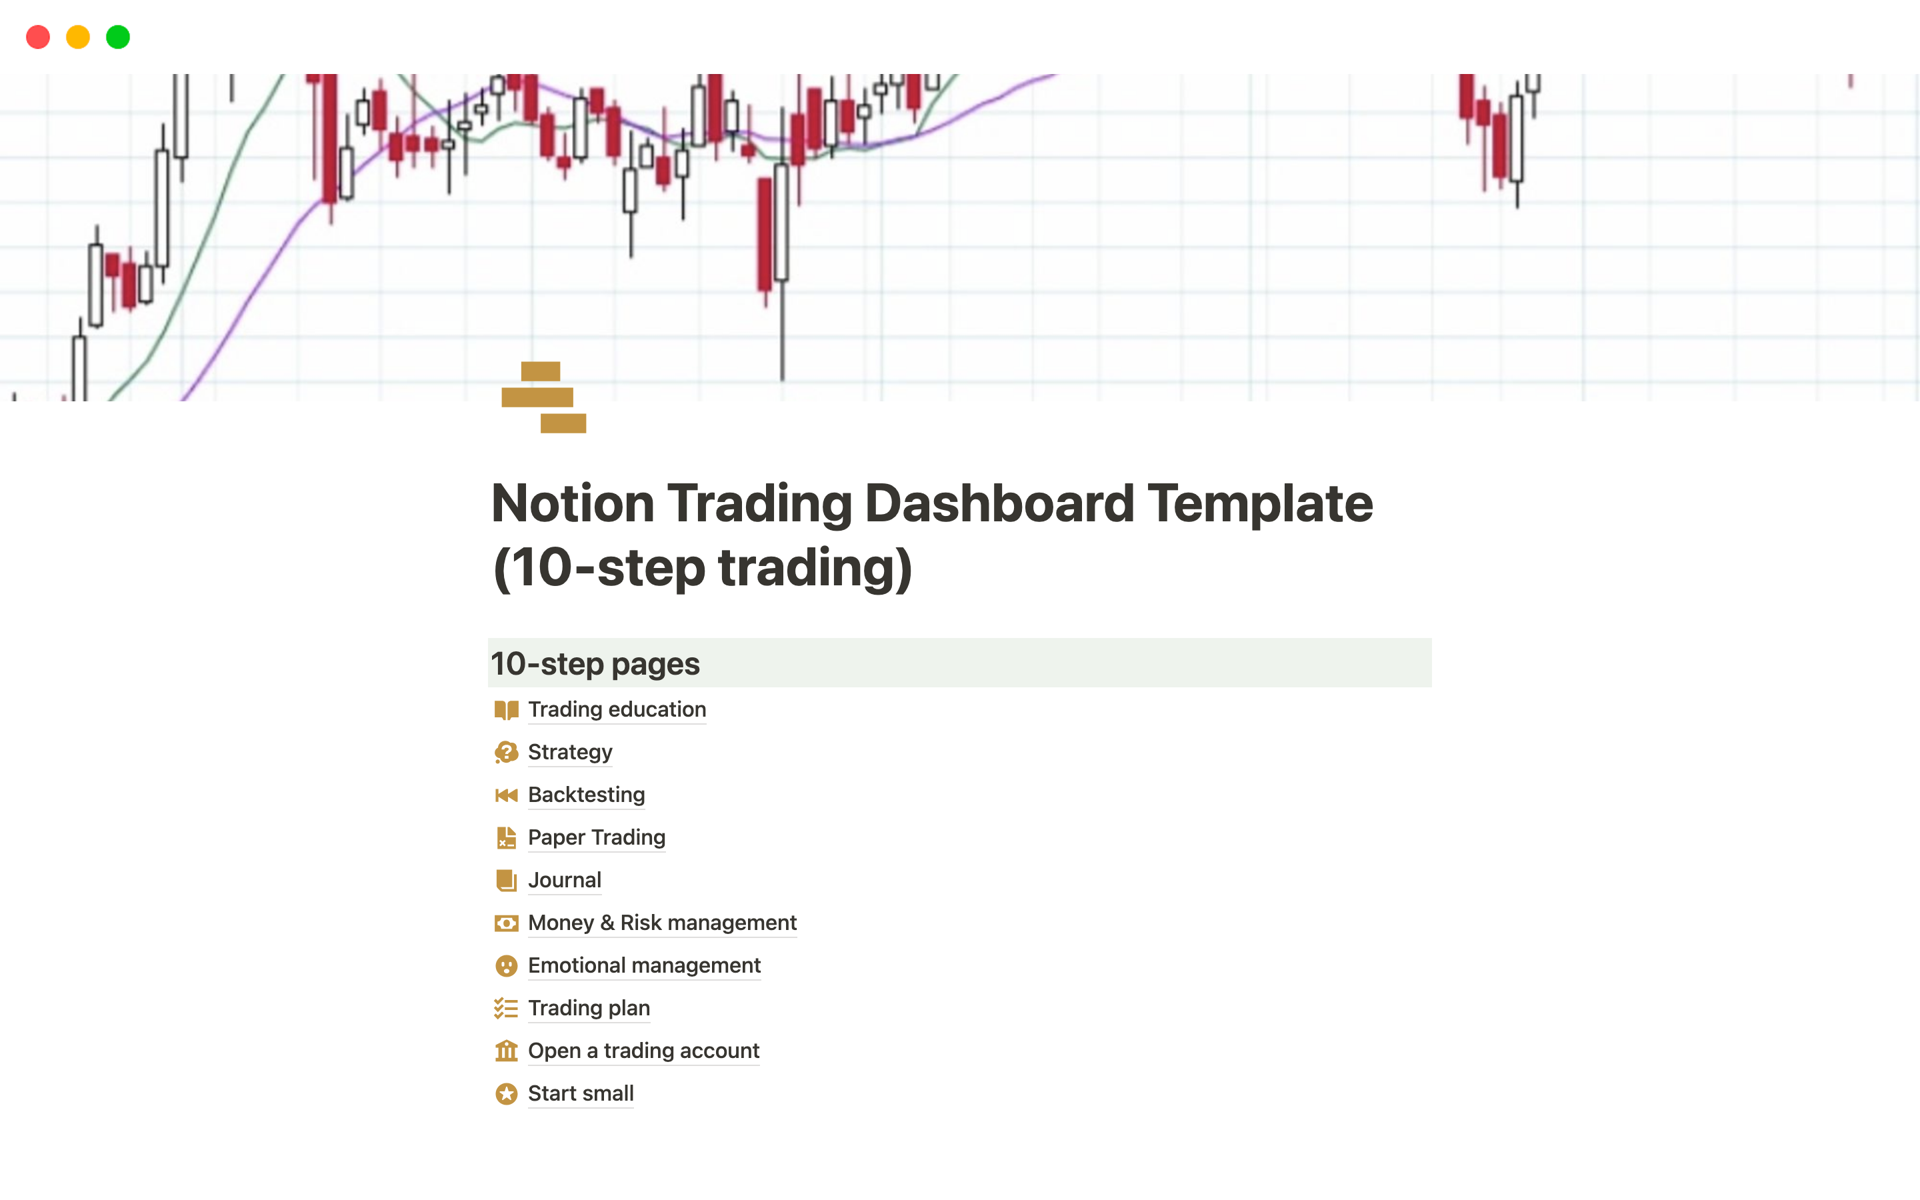 This template comprises the essential tools and resources for traders, making it highly valuable for both beginners and experts. 